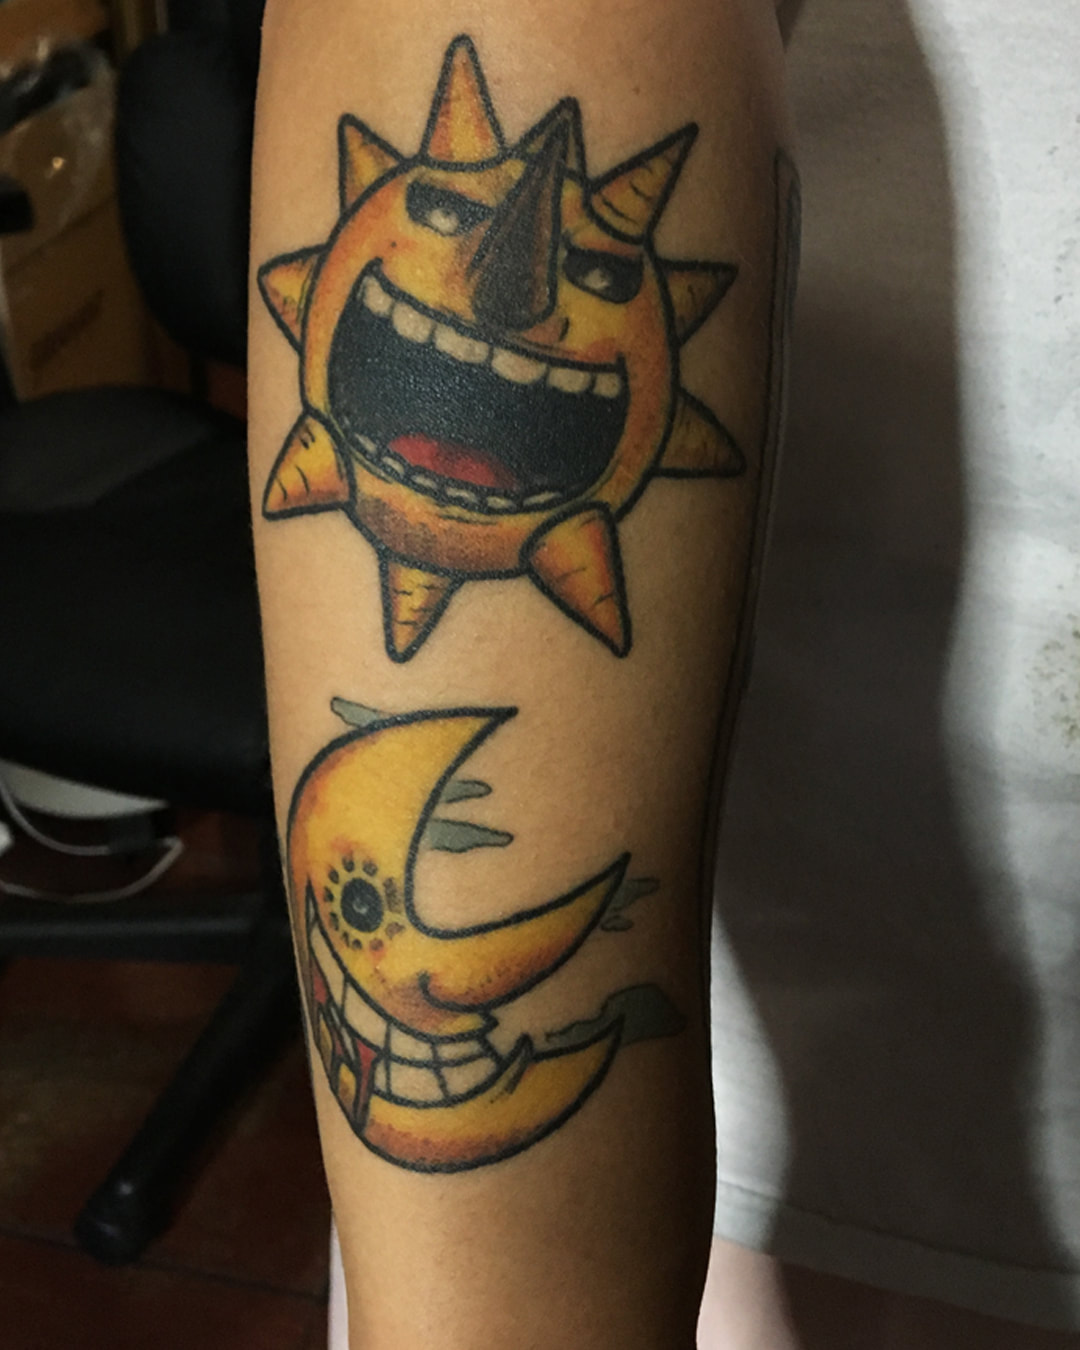 This Soul Eater Tattoo Is Scary Good